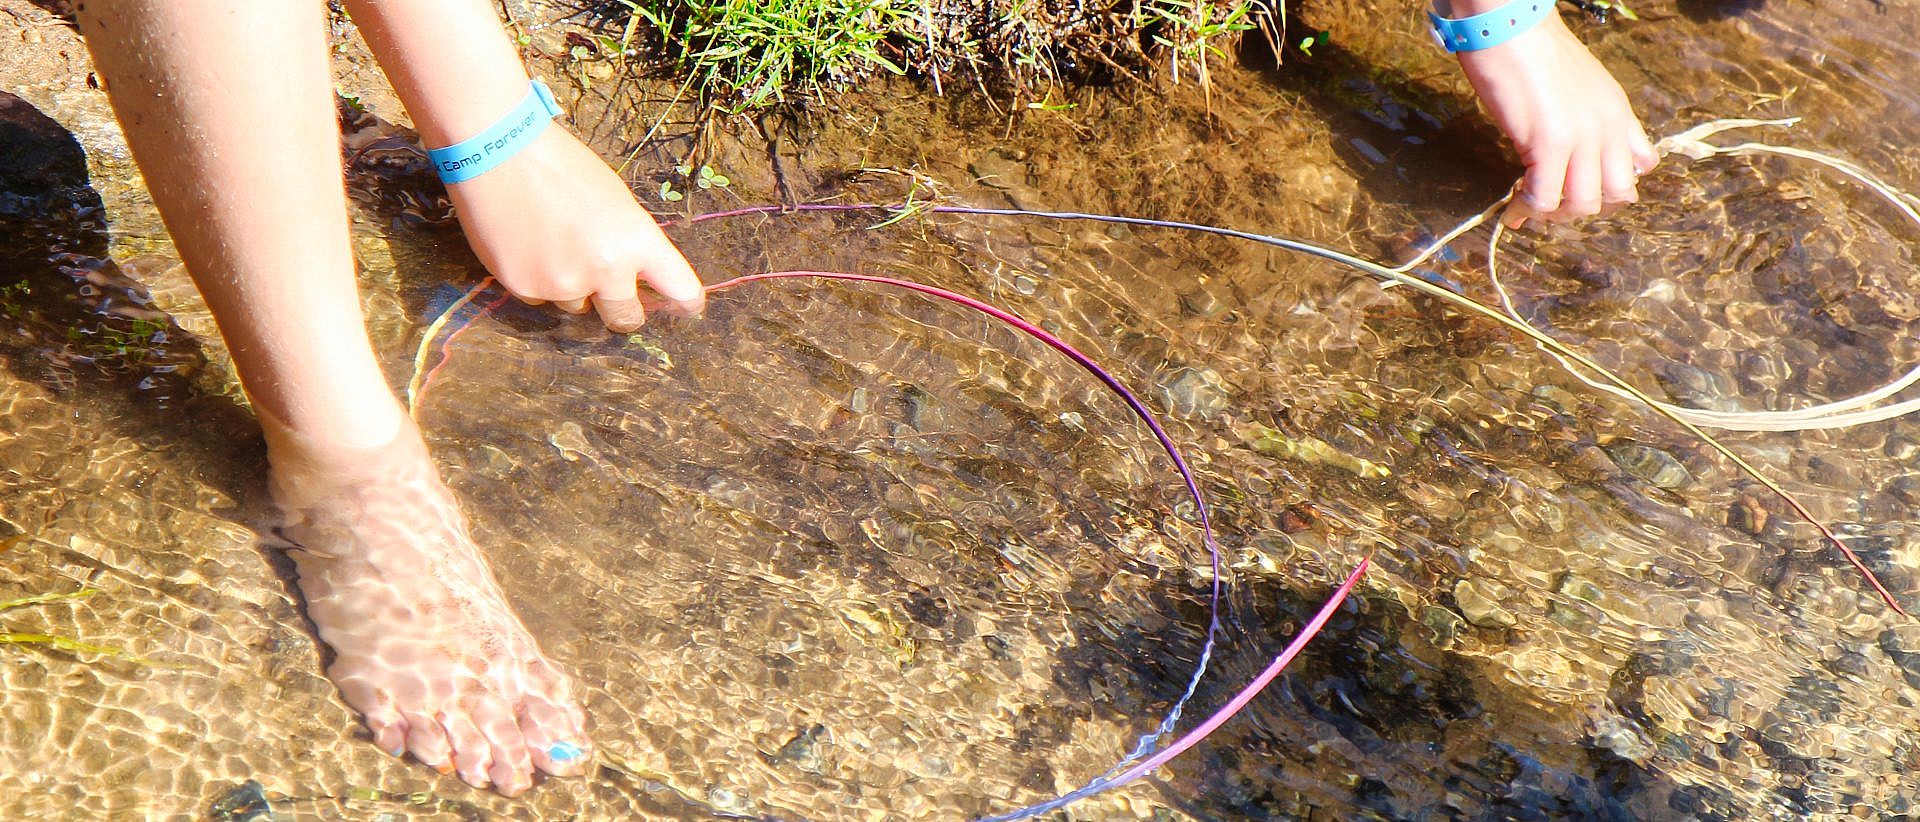 girls doing basketry with fee in creek